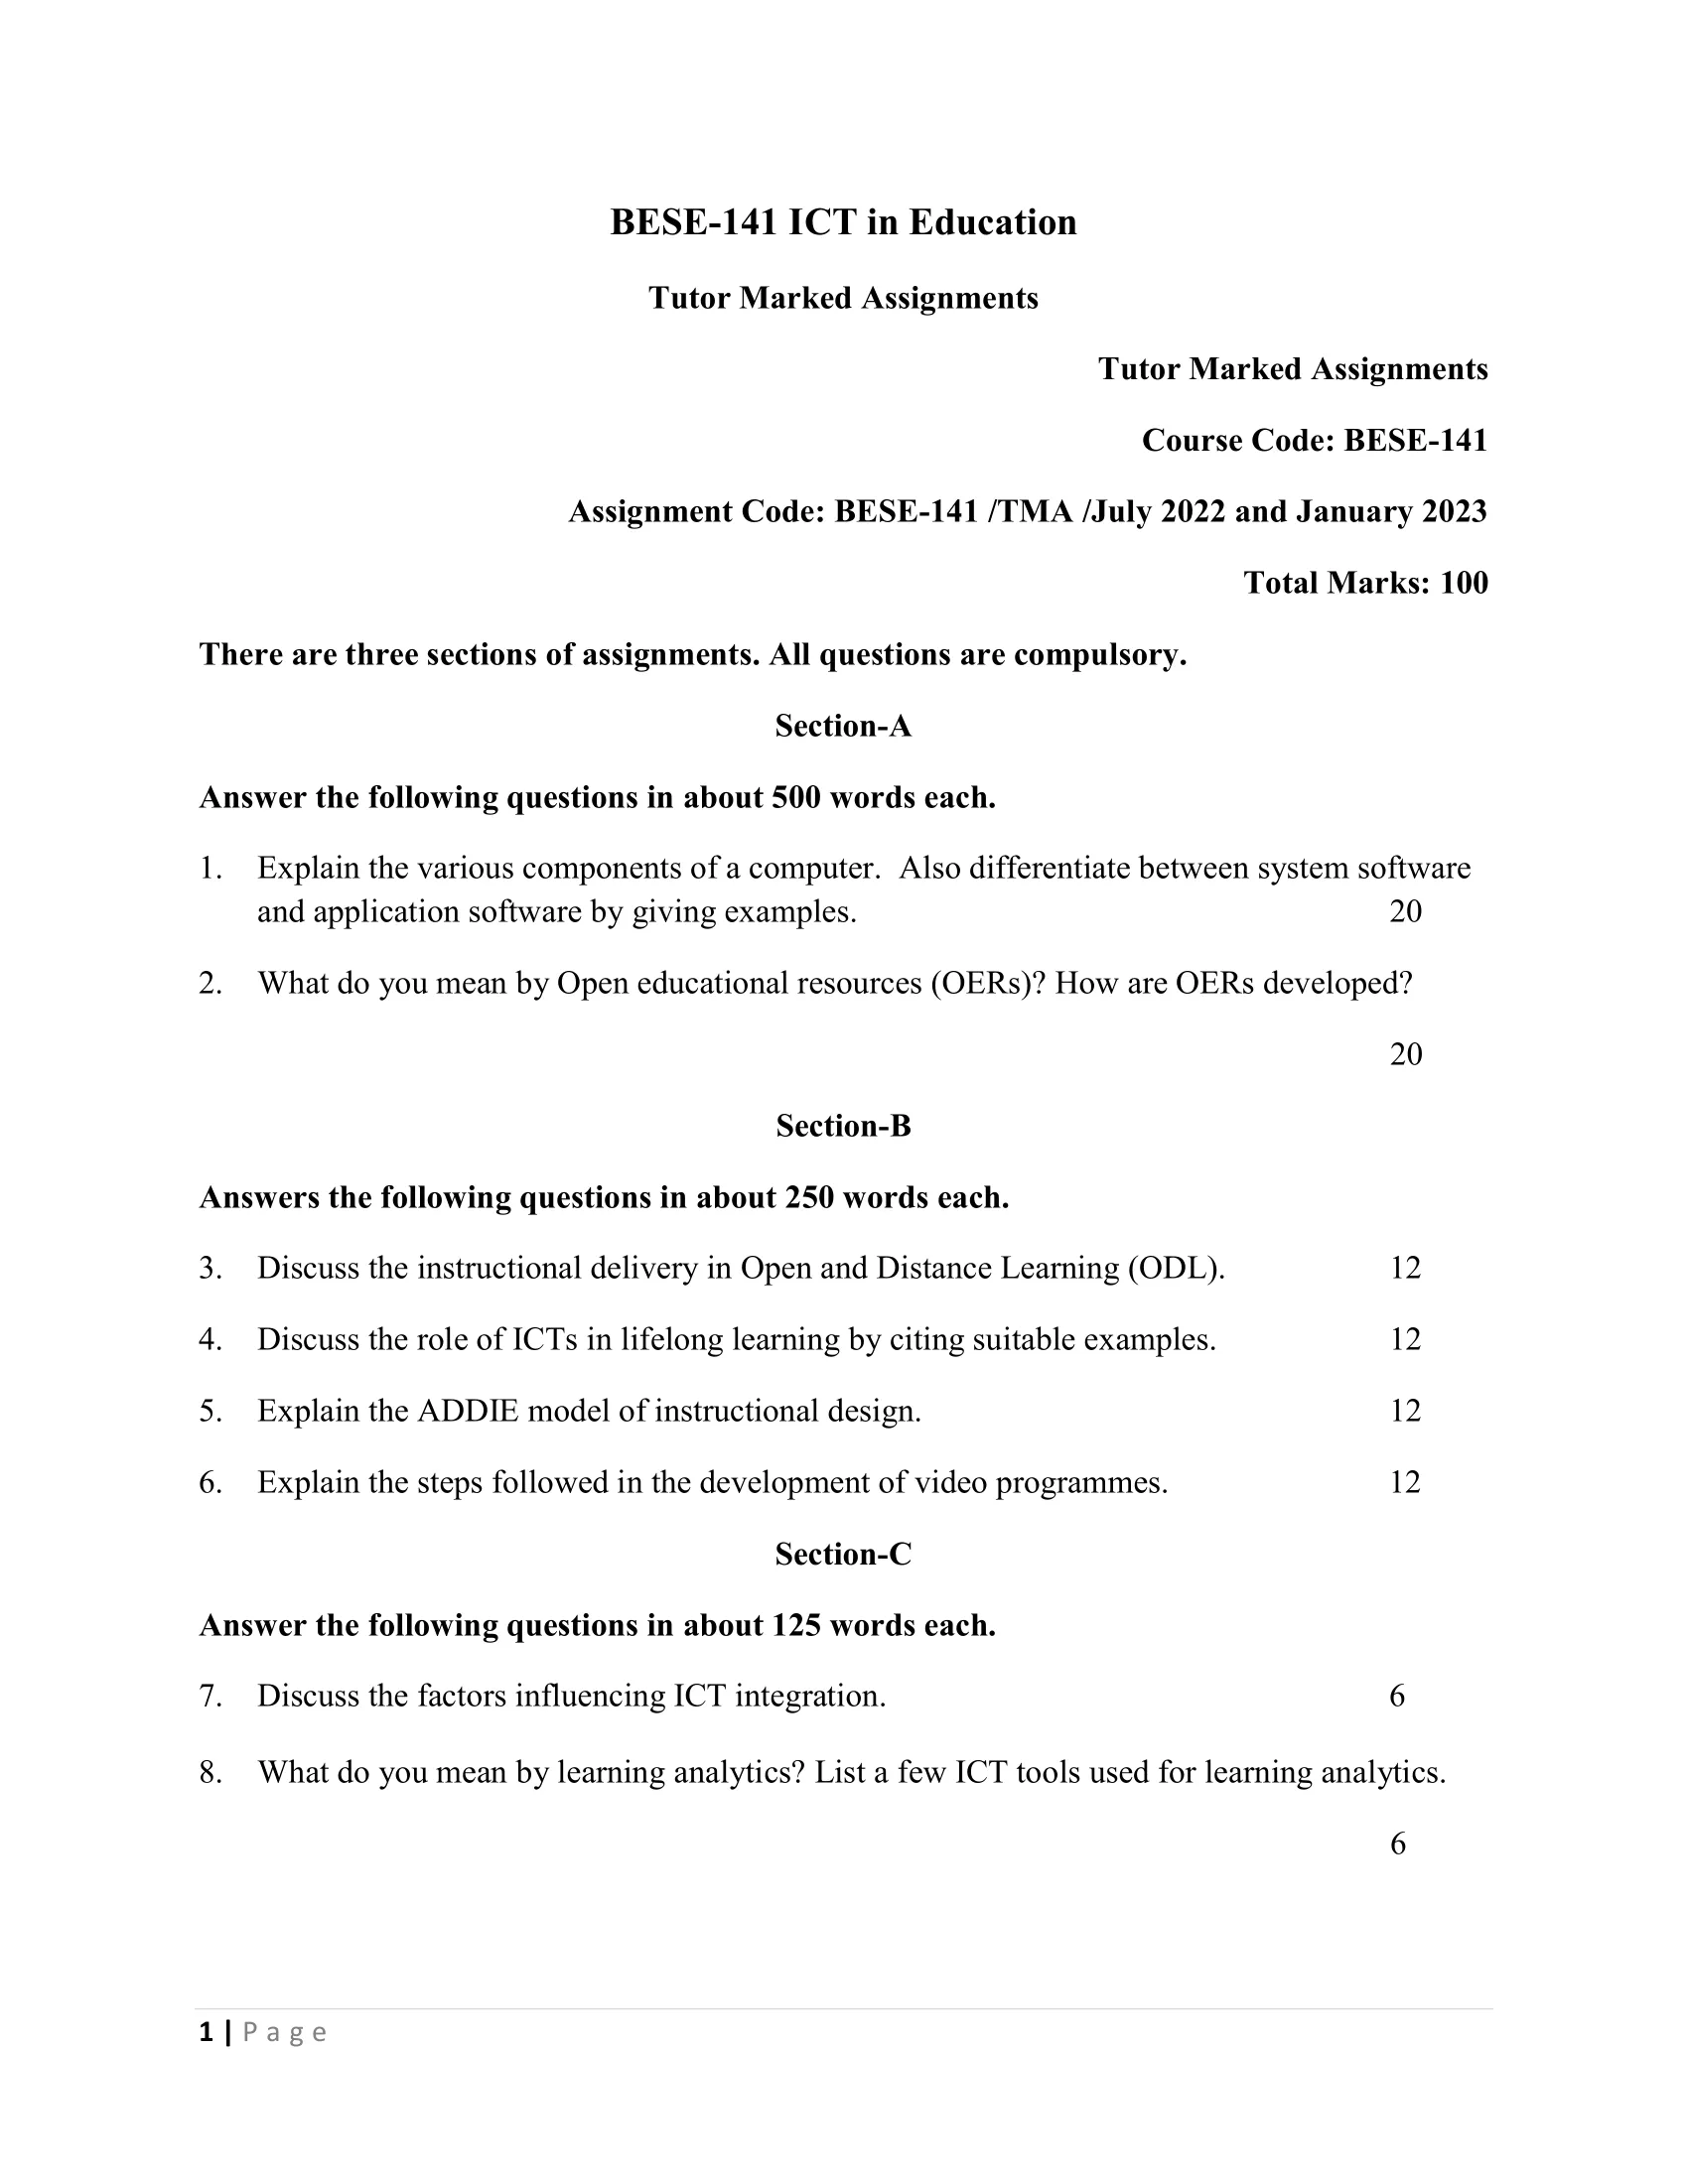 BESE-141 IGNOU BAG Solved Assignment-ICT in Education